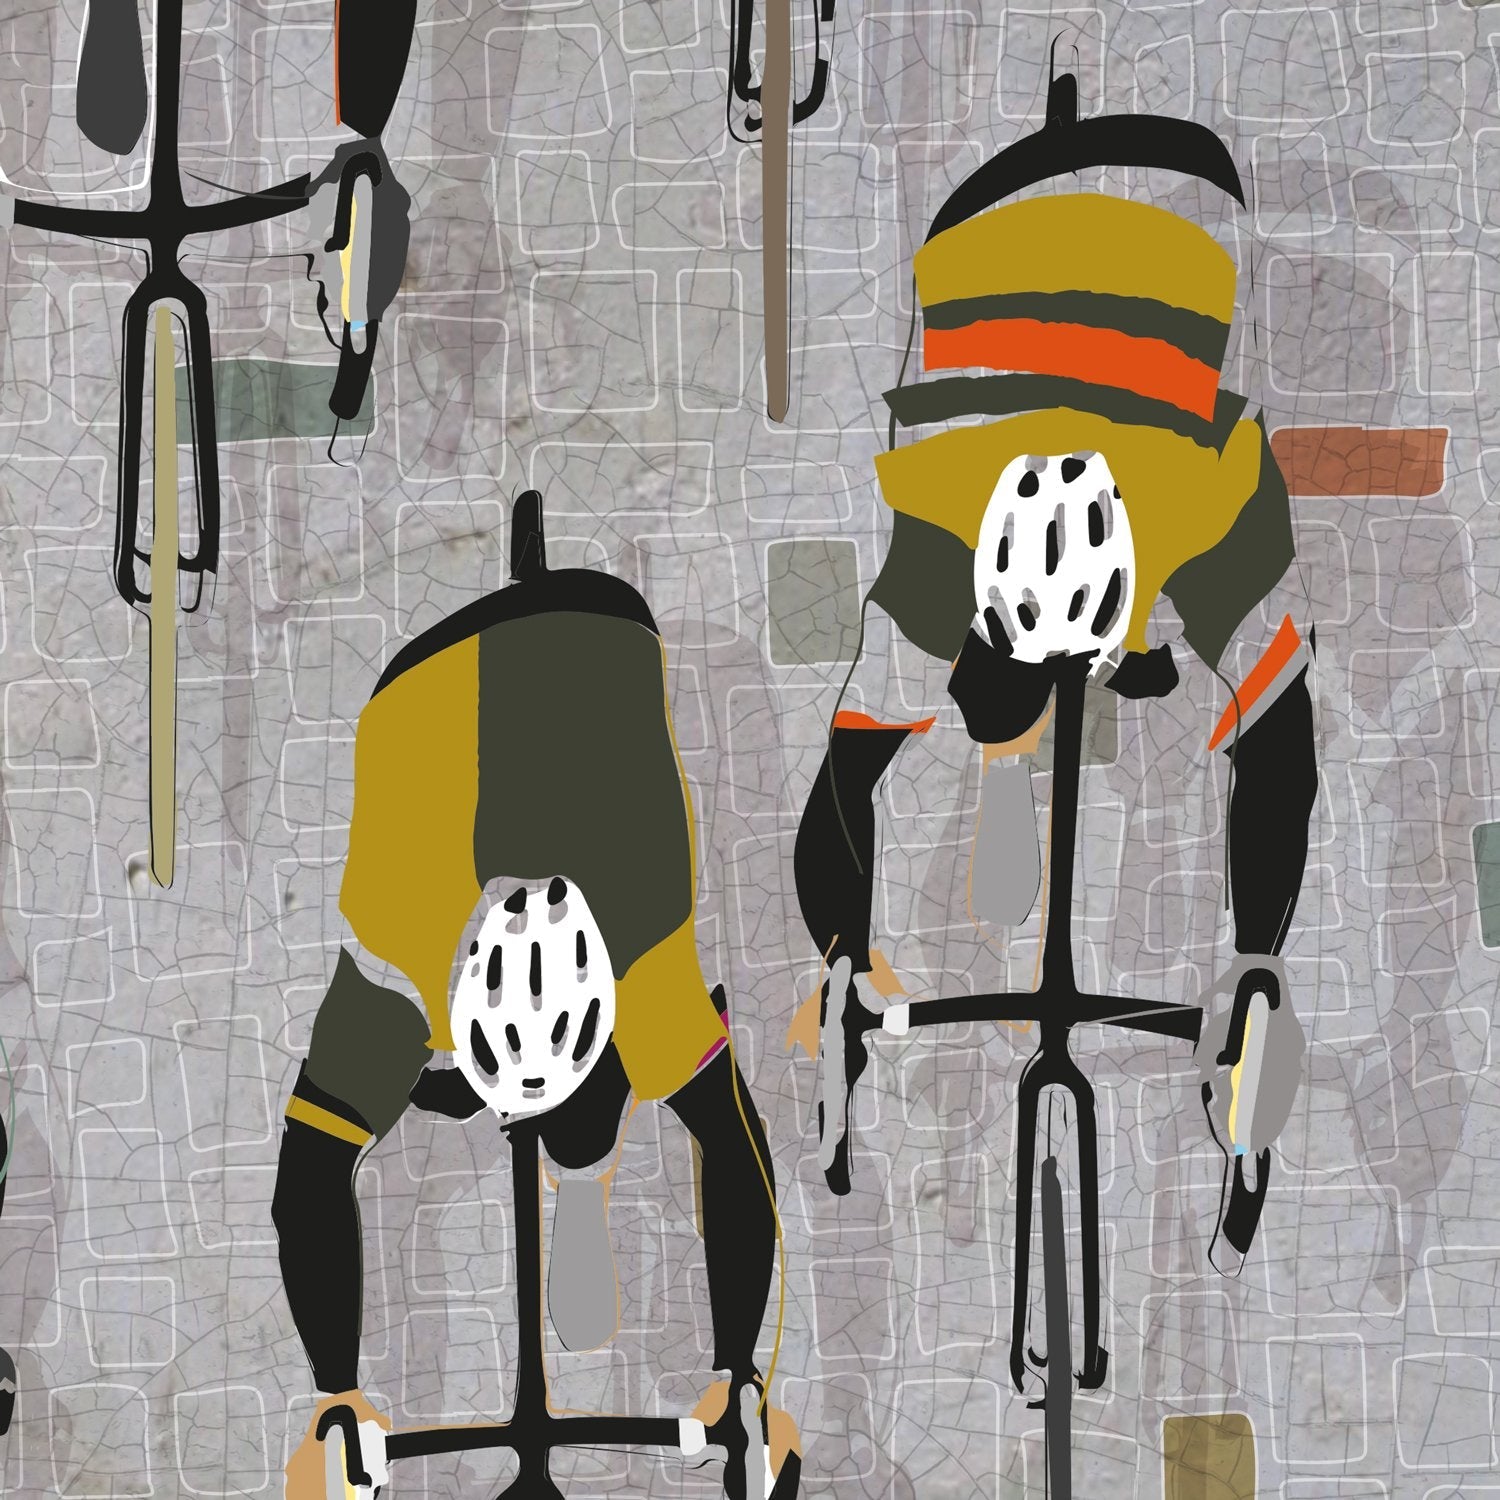 Over The Cobbles - Cycling Poster print. Retro style cycling poster